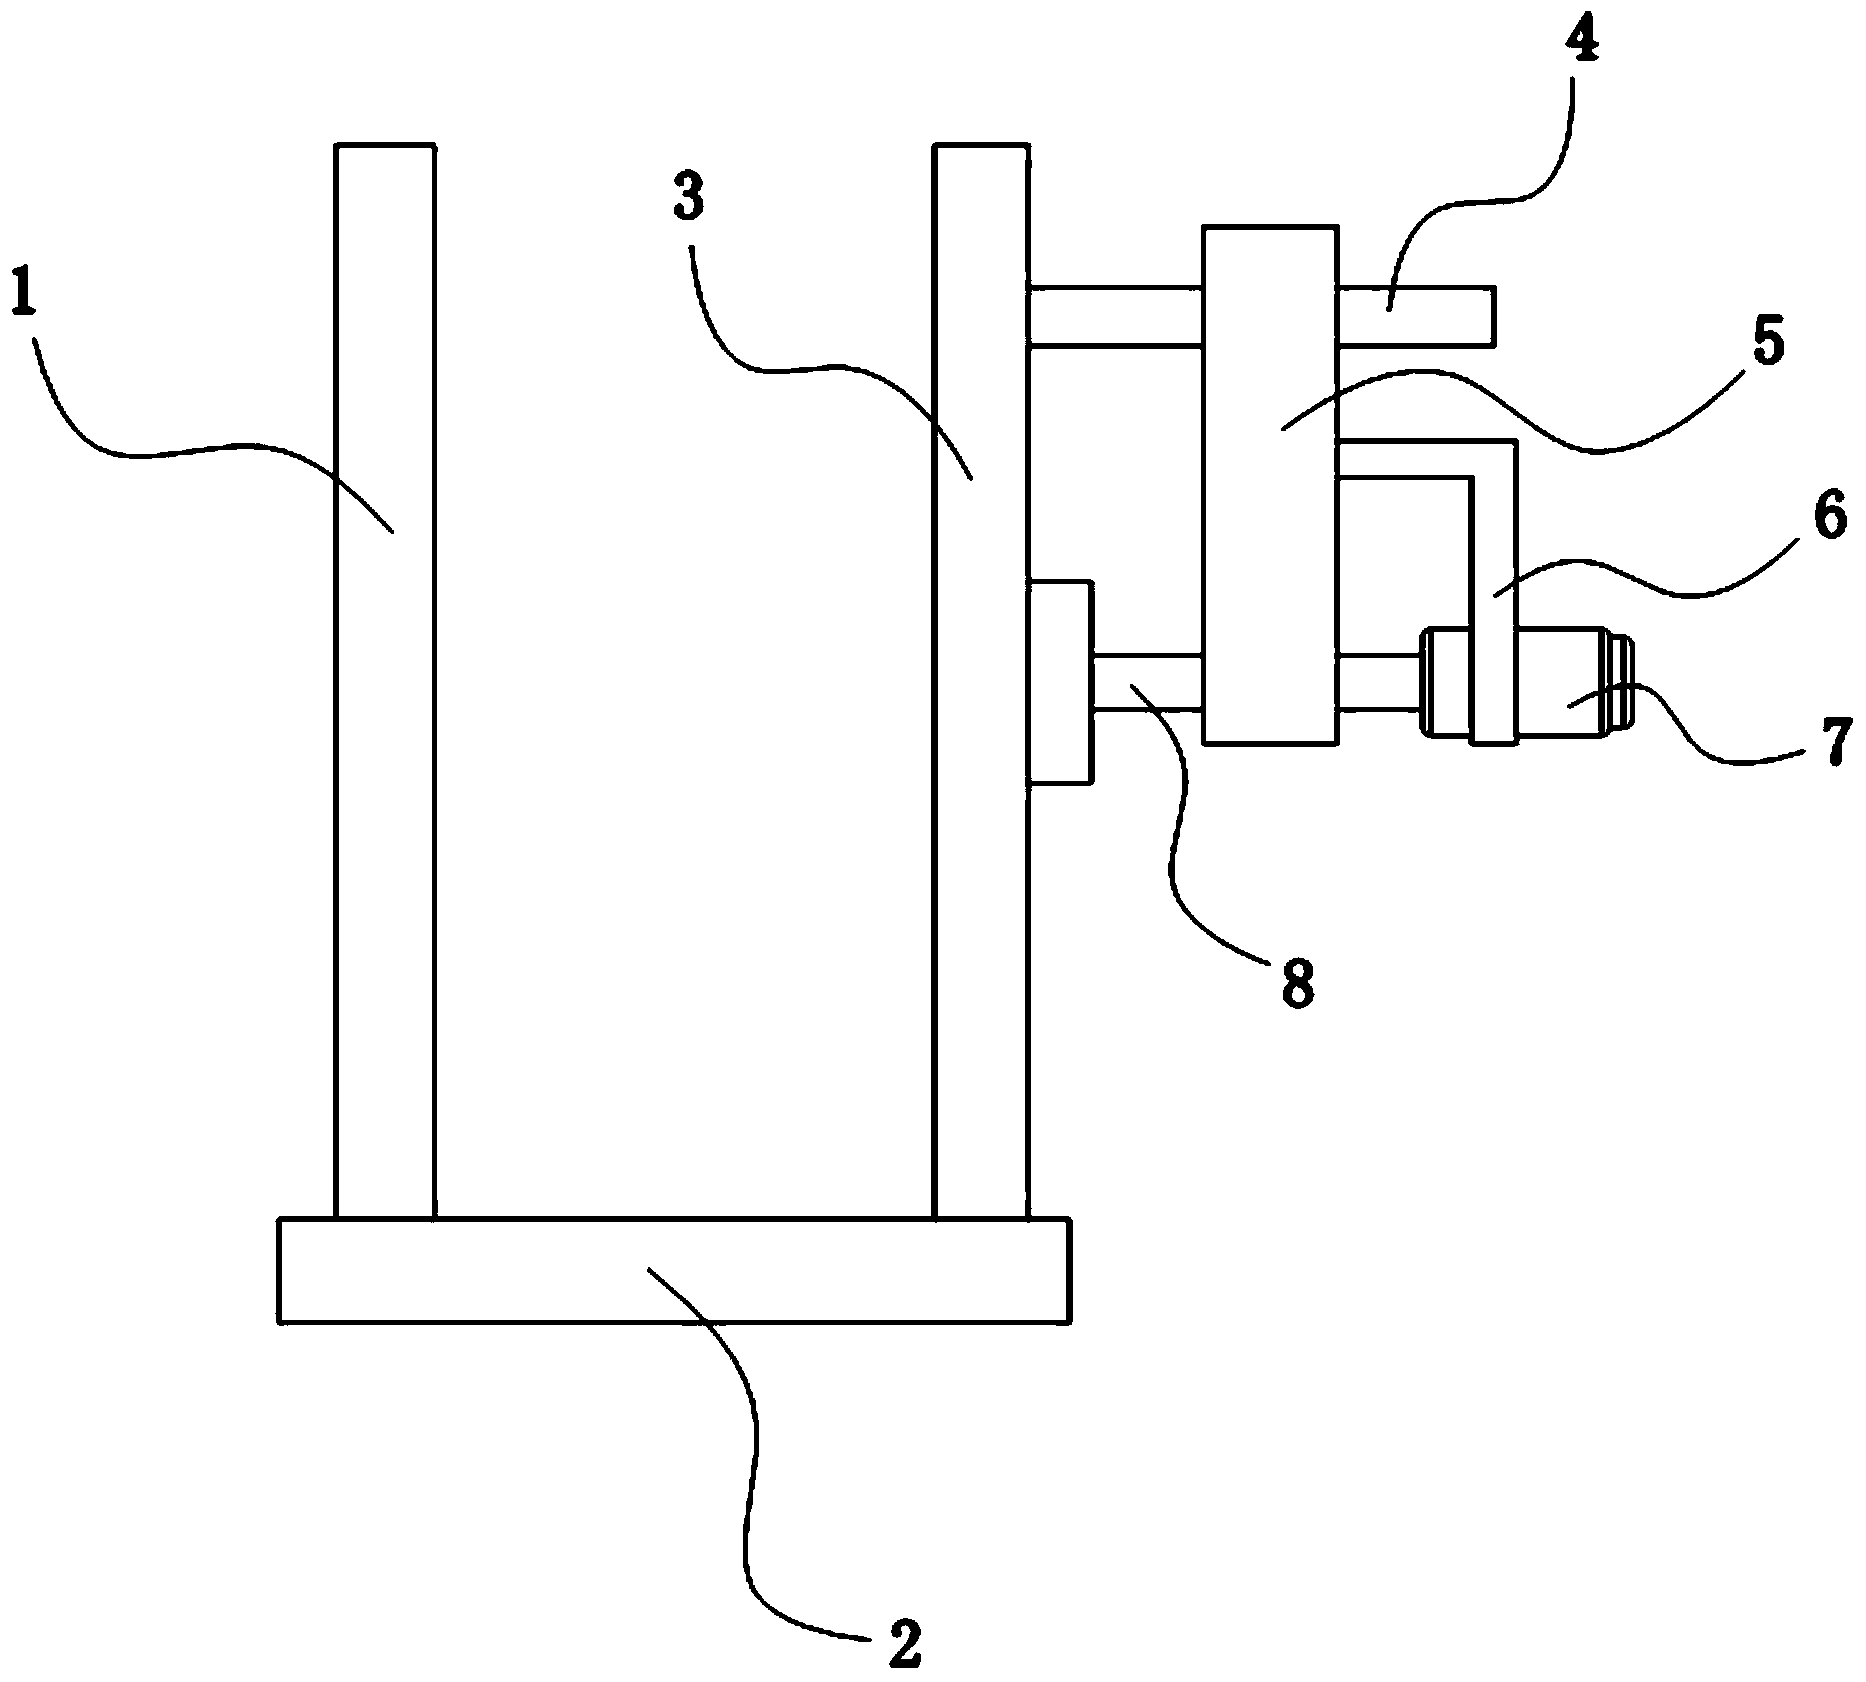 Quantitative motor squeezing device for ultrasonic coupling agent